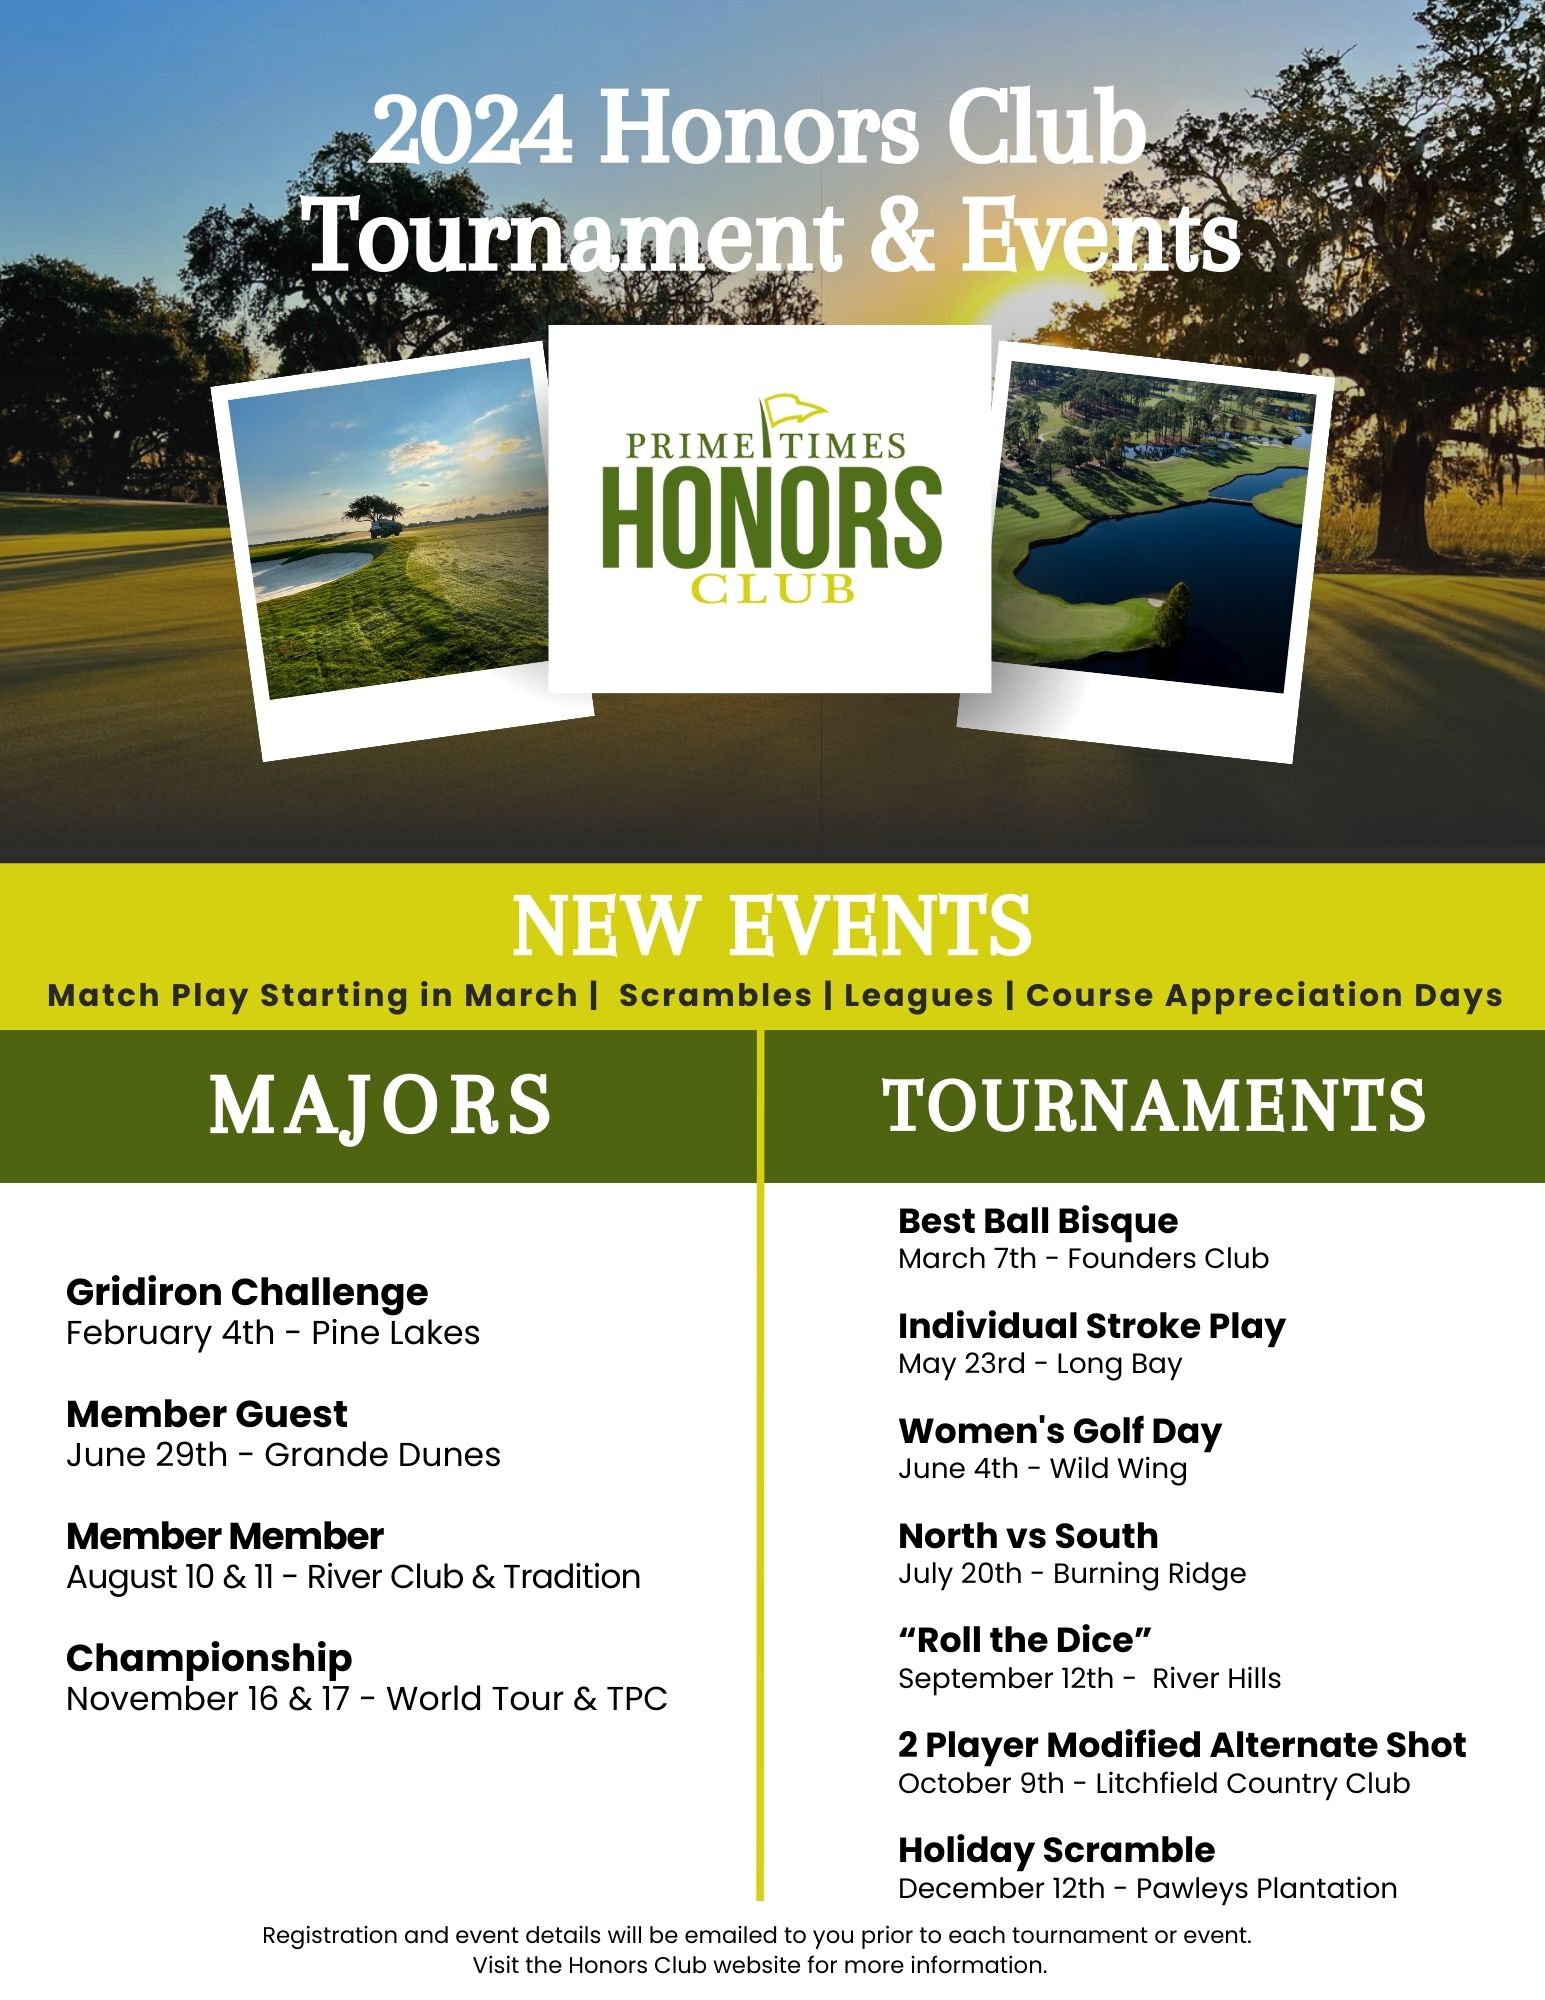 Image: 2024 Honors Club Tournaments & Events